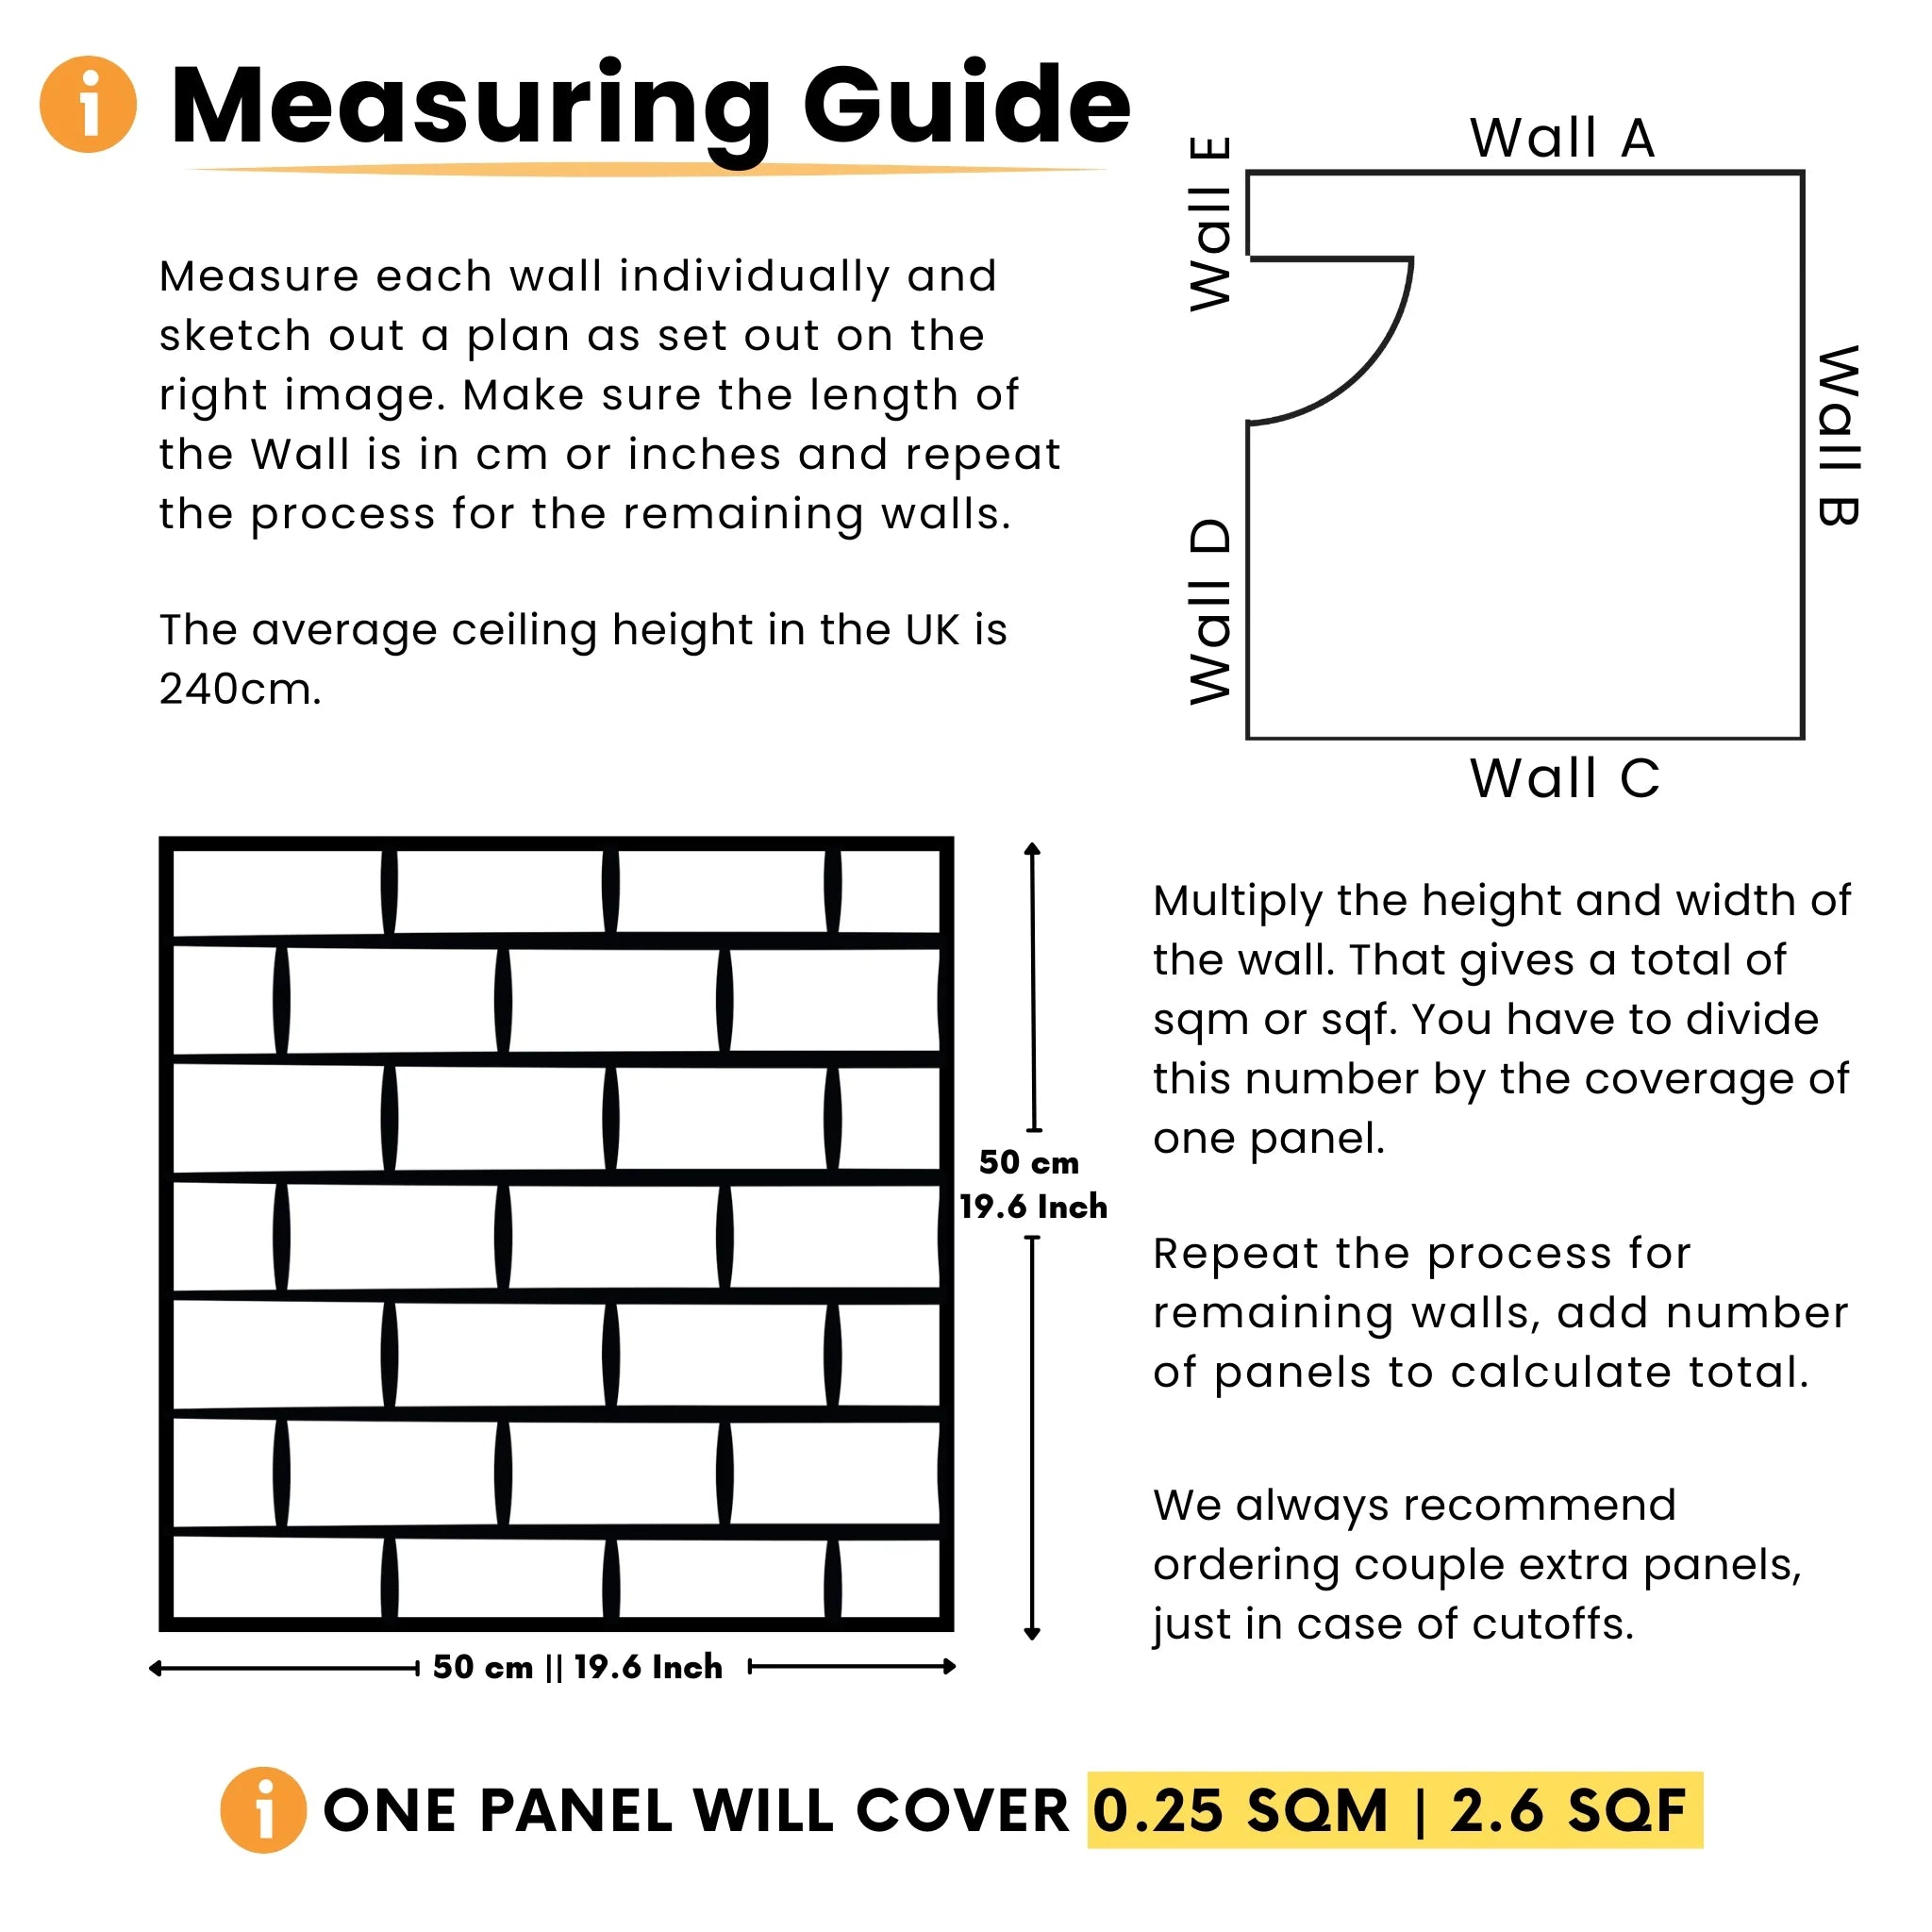 Measuring guide for black PVC wall panels, includes dimensions and coverage